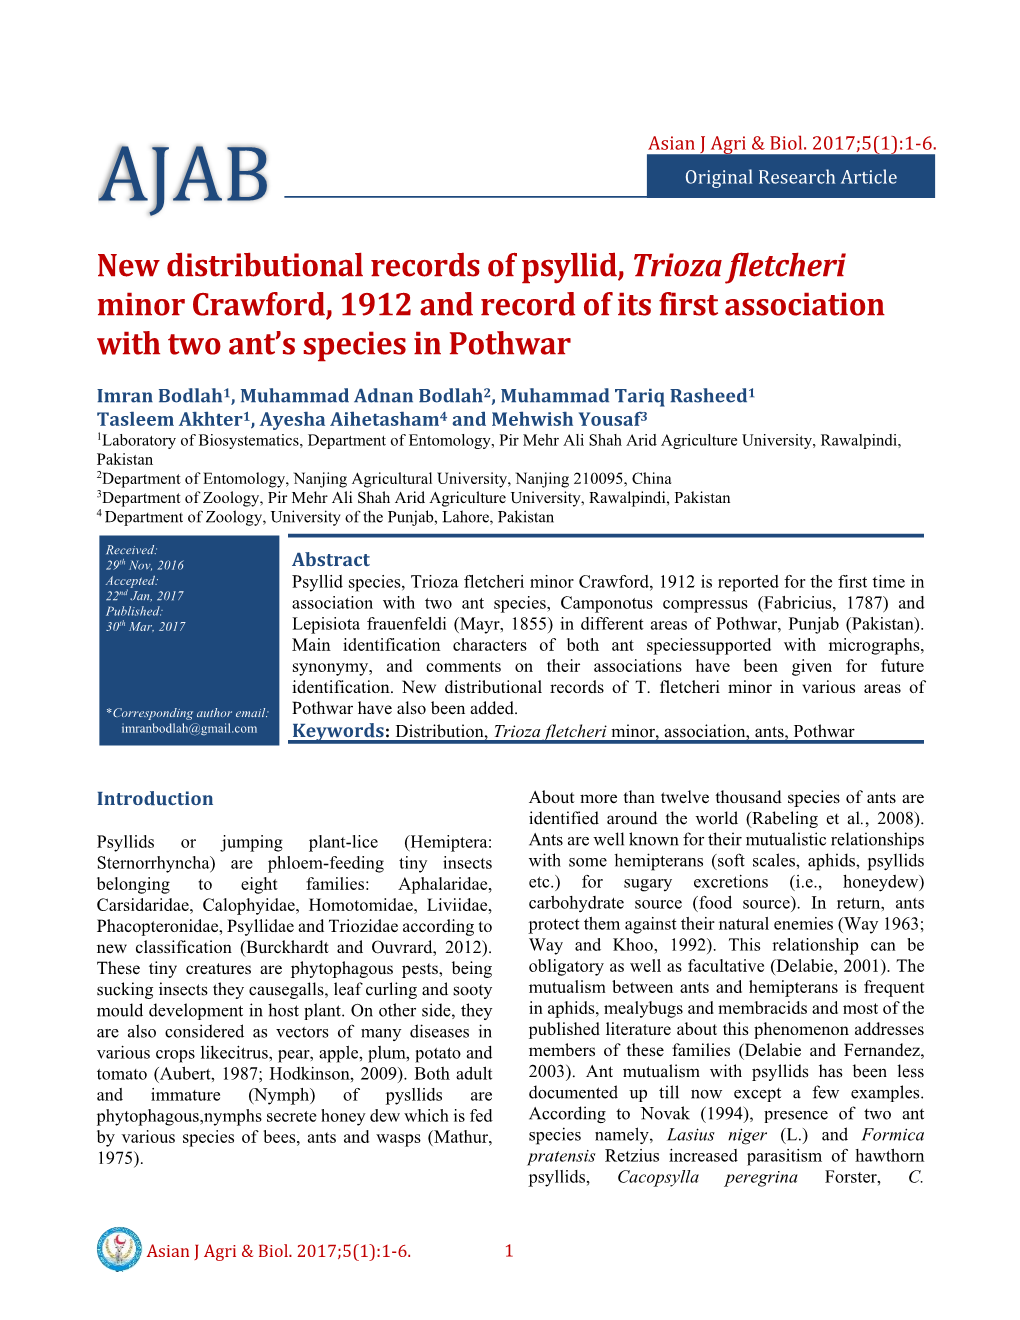 New Distributional Records of Psyllid, Trioza Fletcheri Minor Crawford, 1912 and Record of Its First Association with Two Ant’S Species in Pothwar